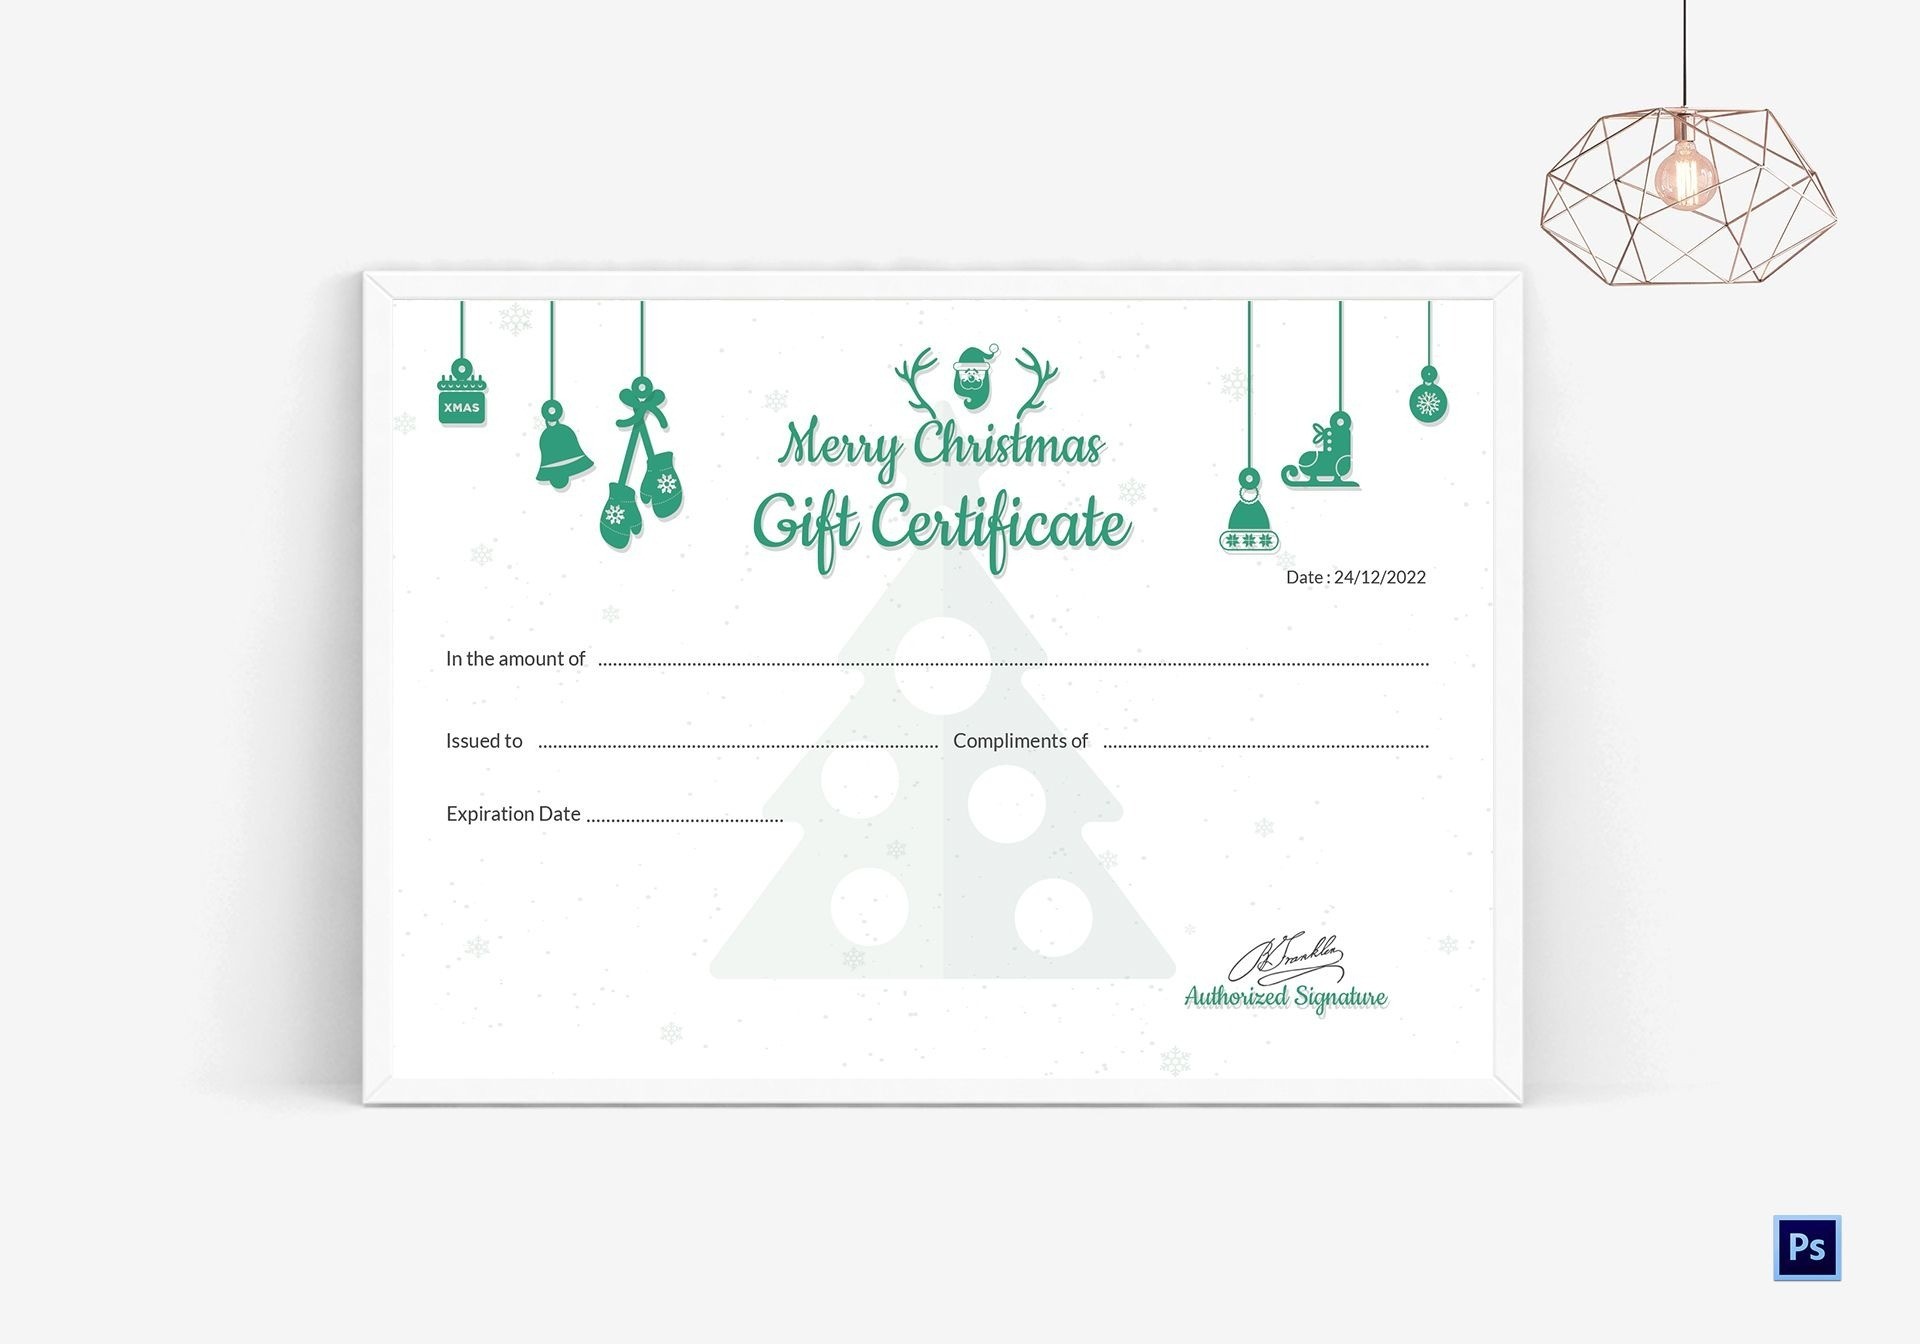 Editable Christmas Gift Certificate In Merry Christmas Gift Certificate Templates